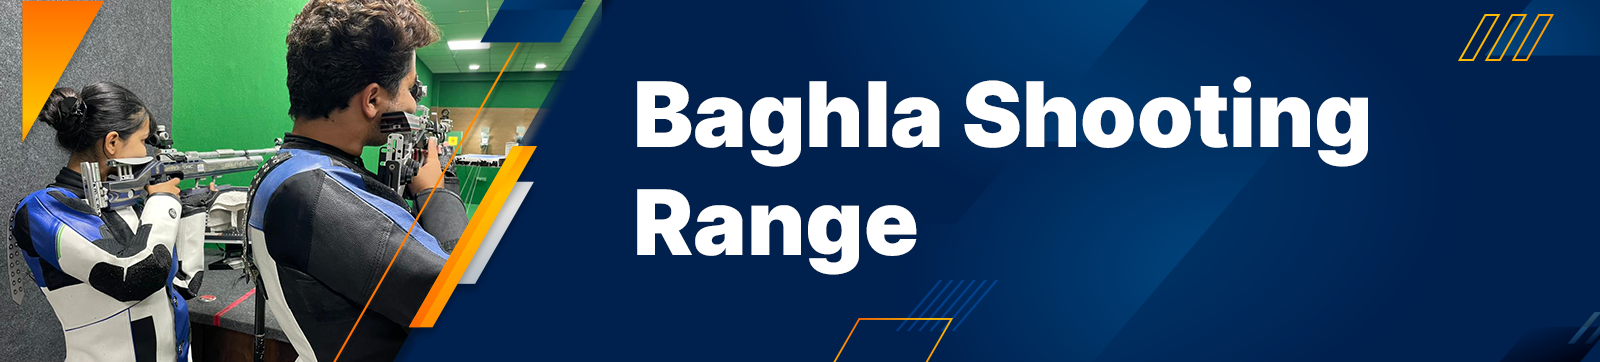 Baghla Shooting Range in Chandigarh Prepares Young Shooters